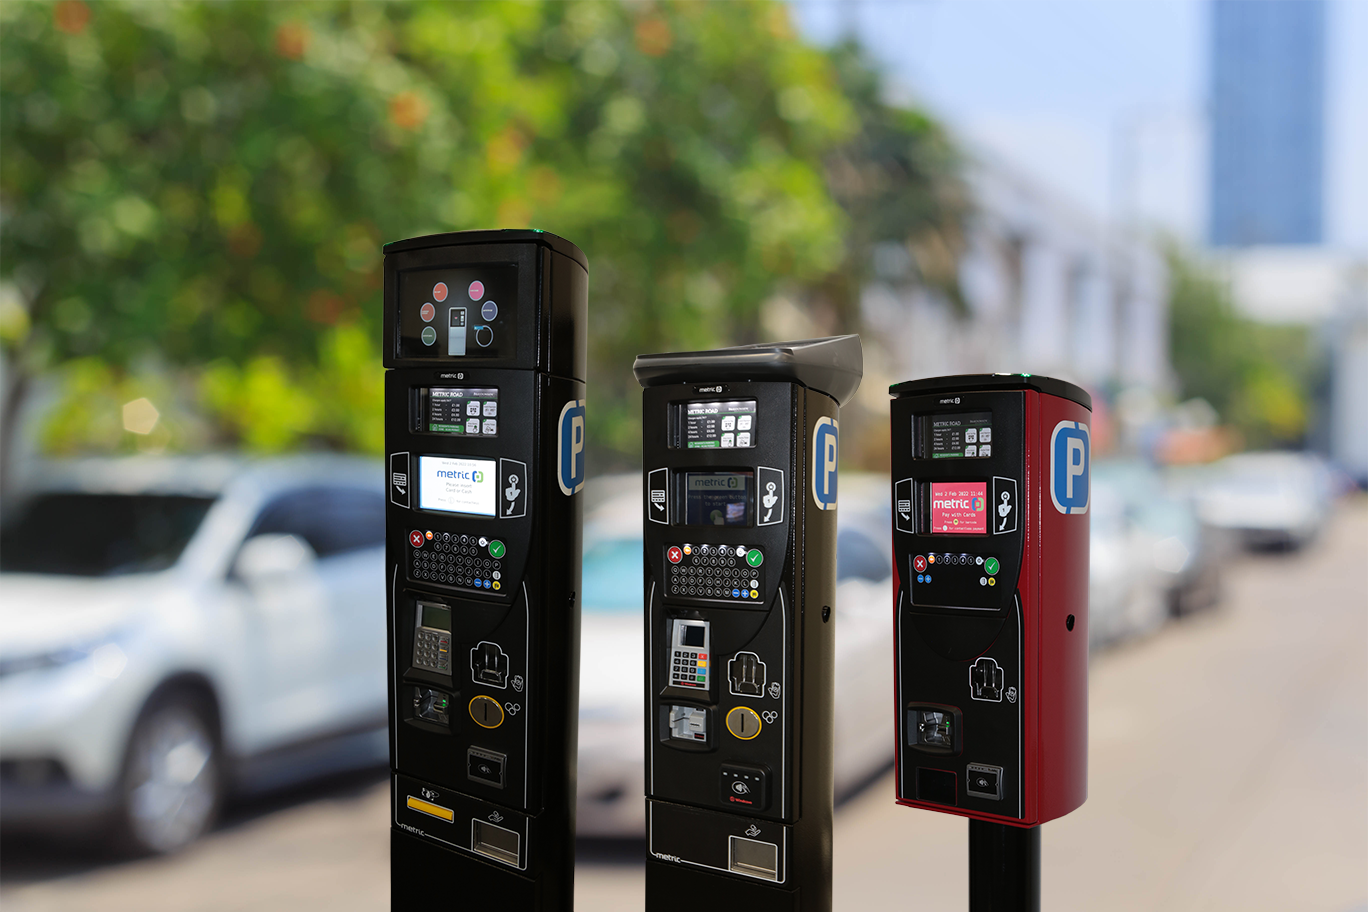 METRIC Parking Systems - The METRIC Elite LS Touchscreen Parking Terminal